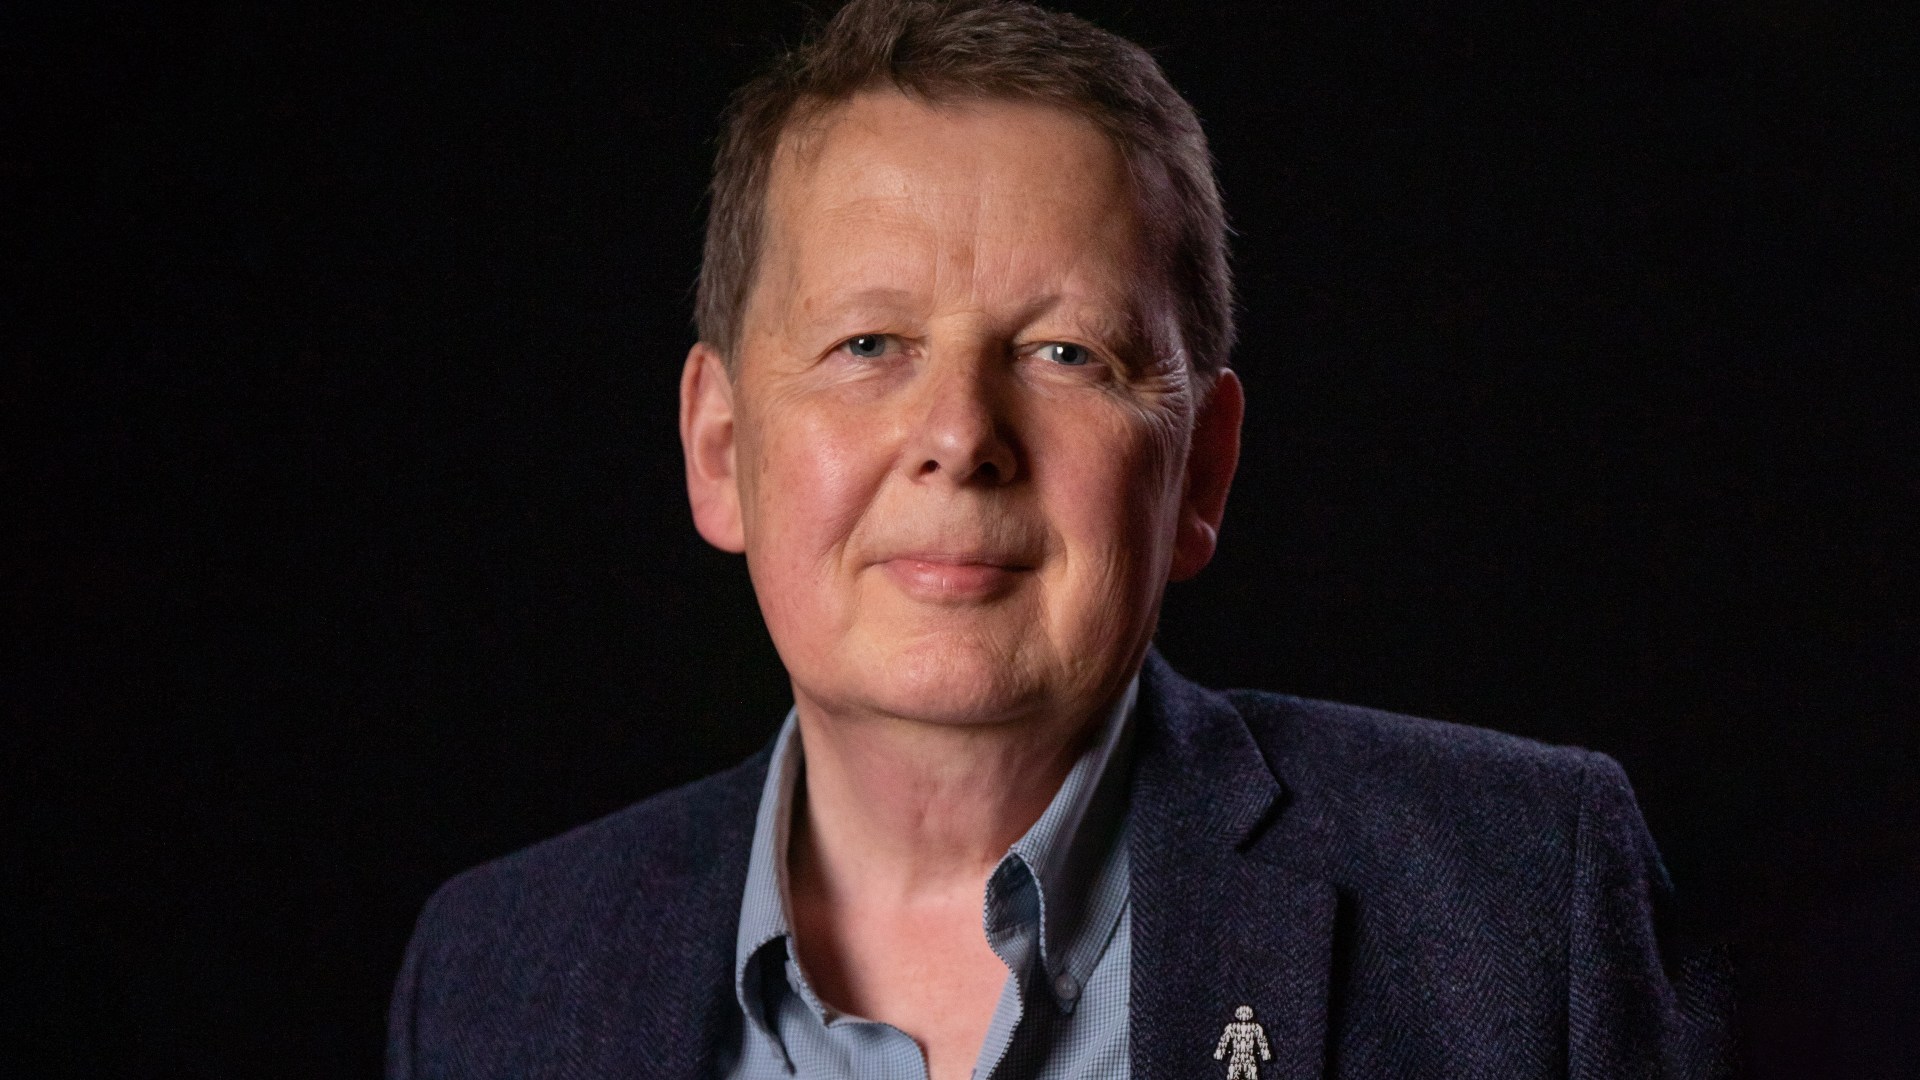 Bill Turnbull’s Lifesaving Prostate Cancer Campaigning Continues